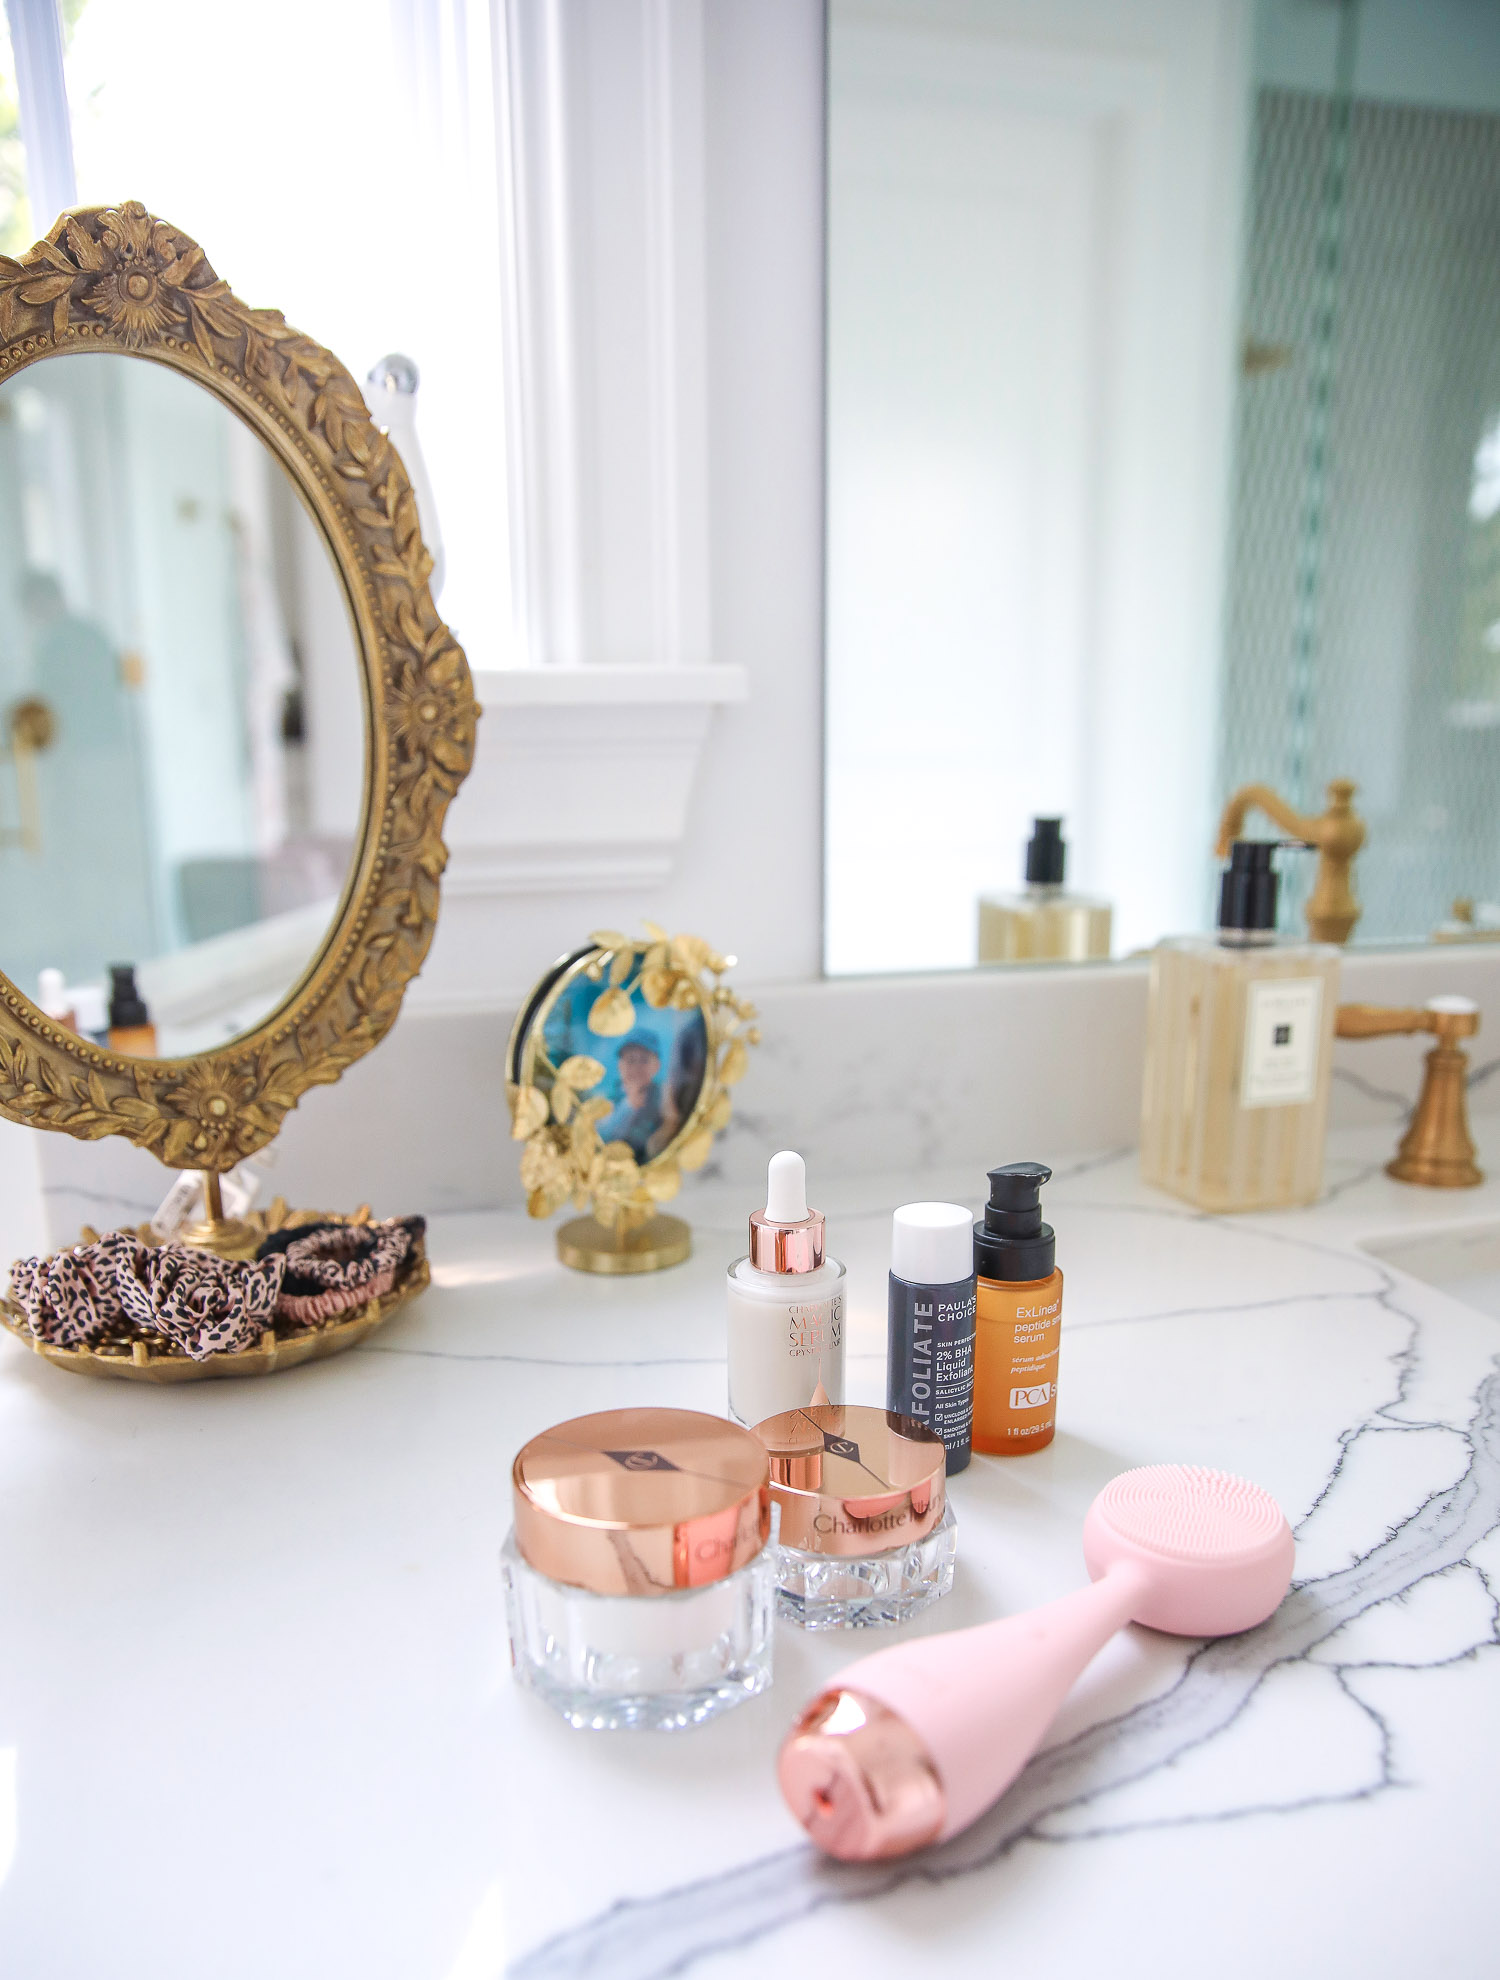 Emily gemma master bathroom, Nordstrom anniversary sale 2021 beauty must haves, anthropologie bathrom decor 2021, pinterest bathroom all white gold | Nordstrom Anniversary Sale 2021 by popular US life and style blog, The Sweetest Thing: image of a silicone face scrubber, gold filigree hand mirror, and skincare products on a white marble counter. 